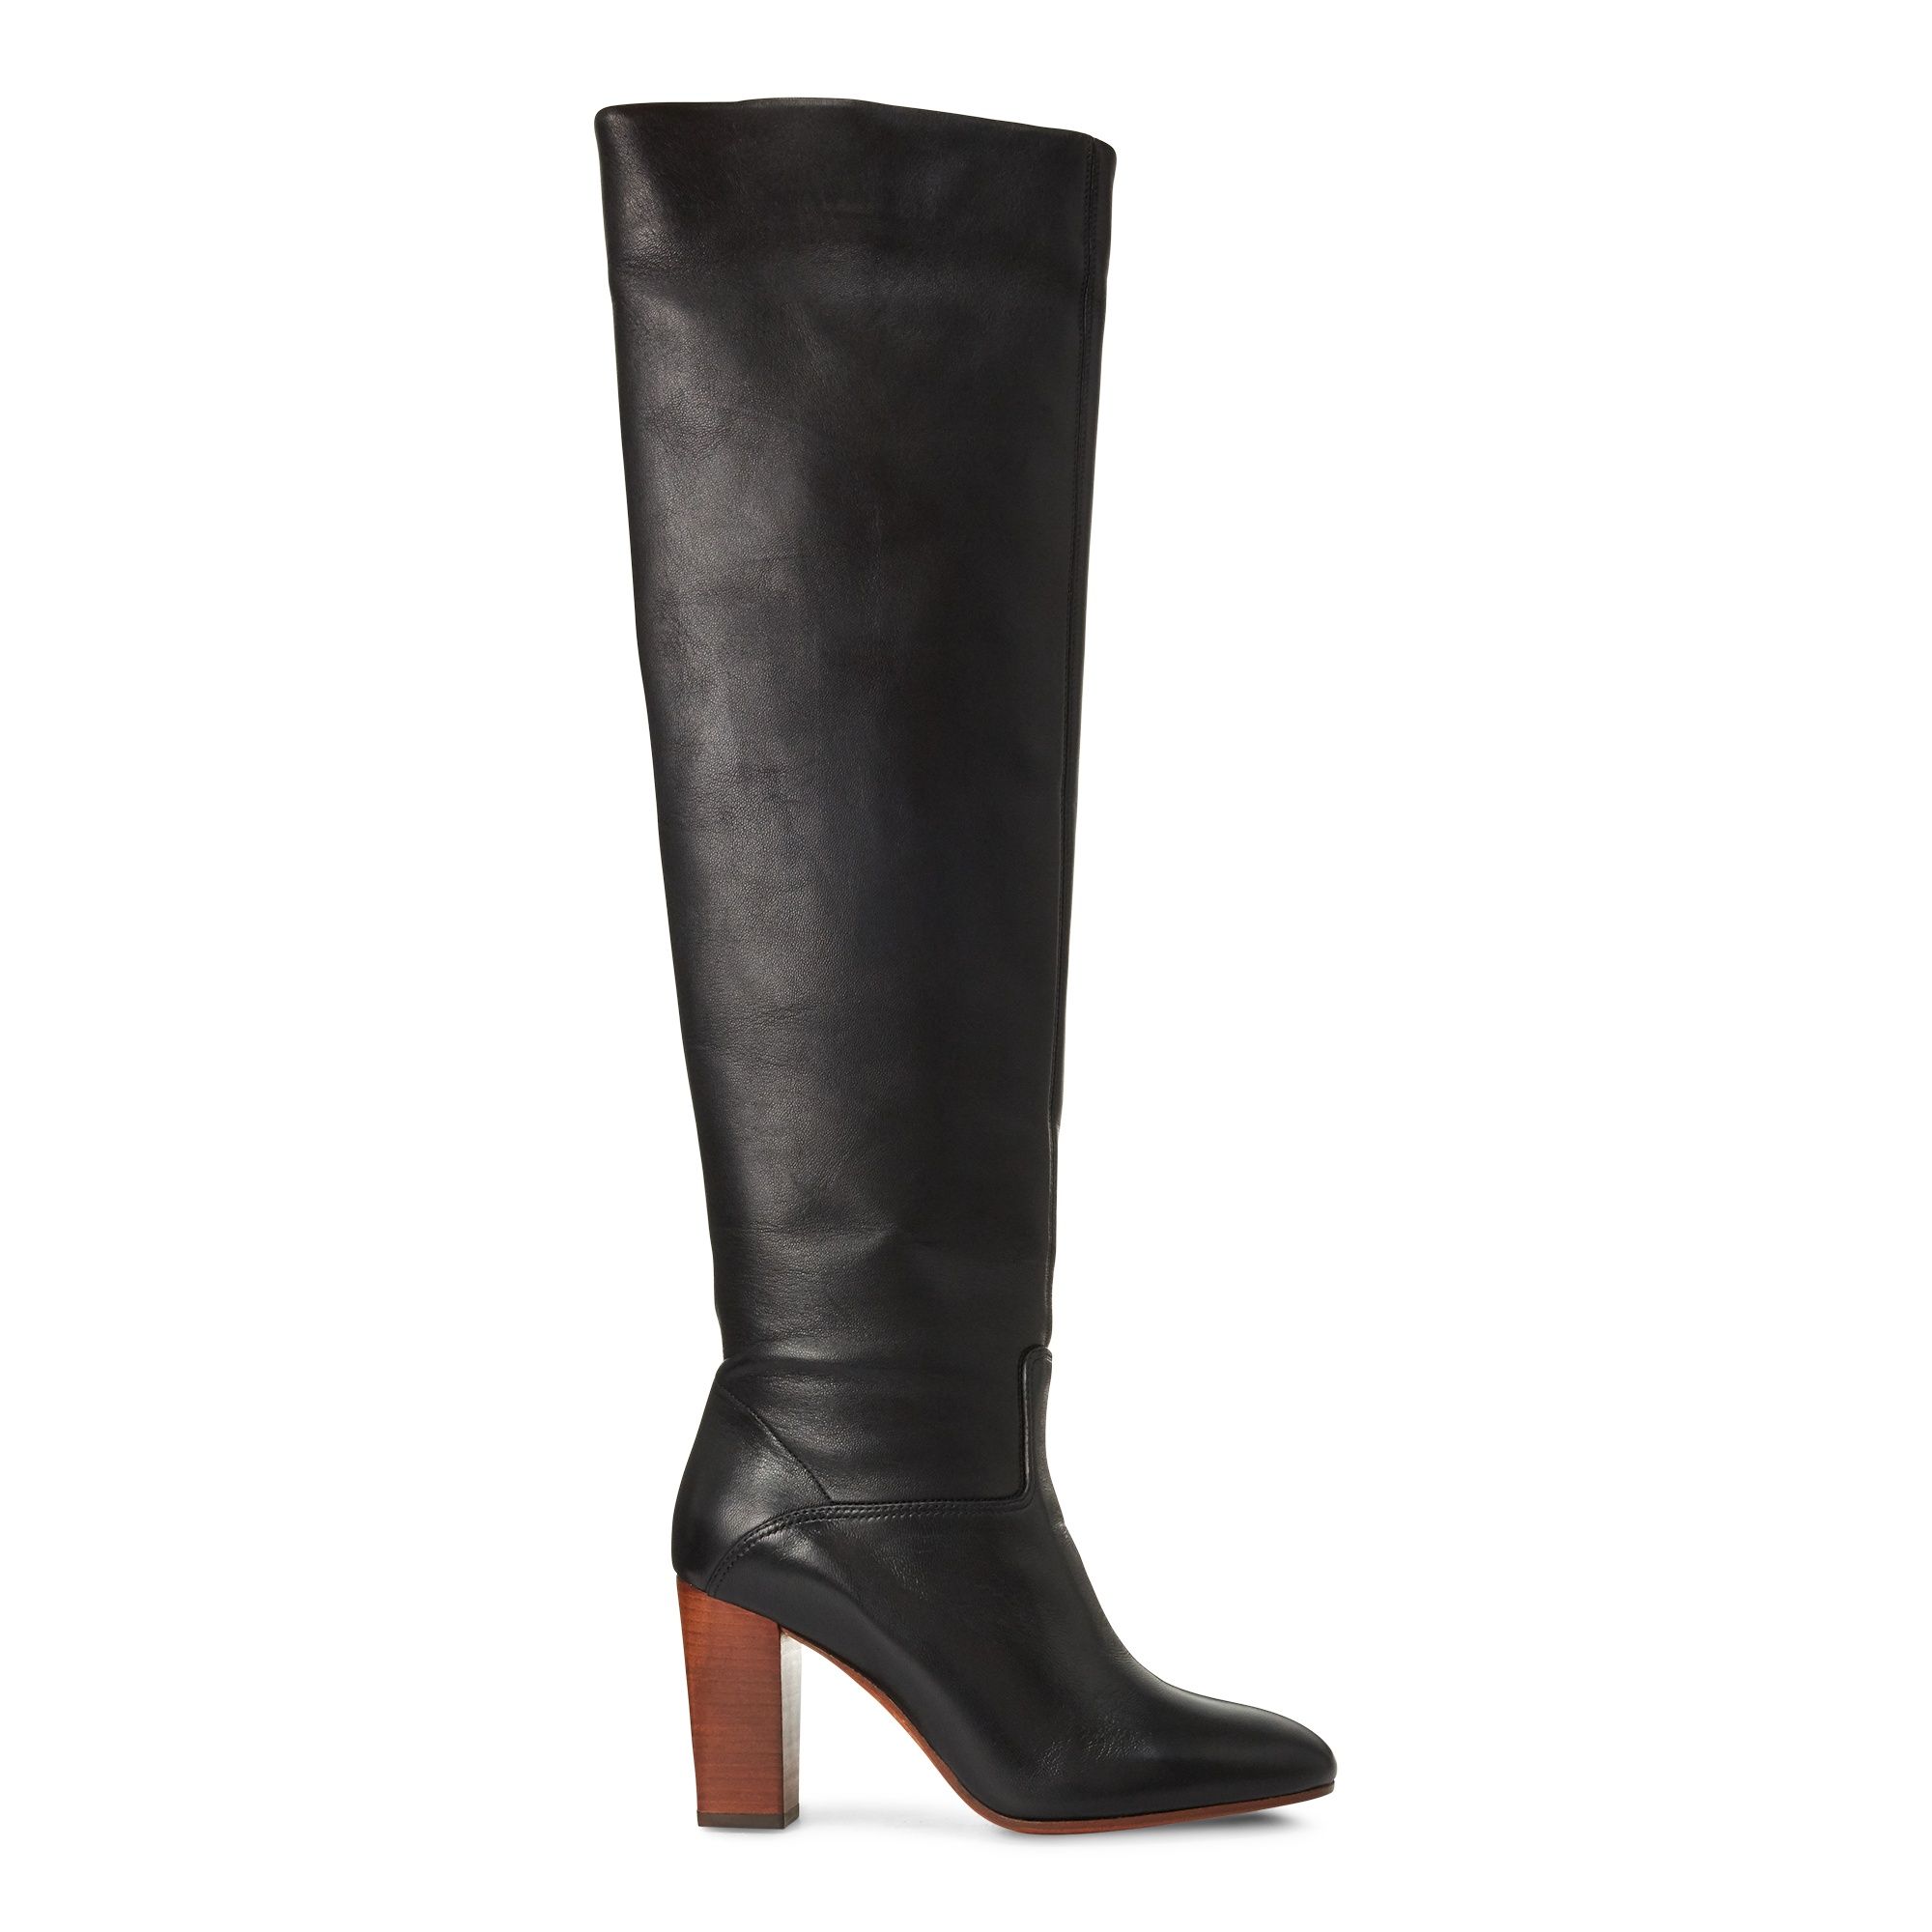 Brie Leather Boot